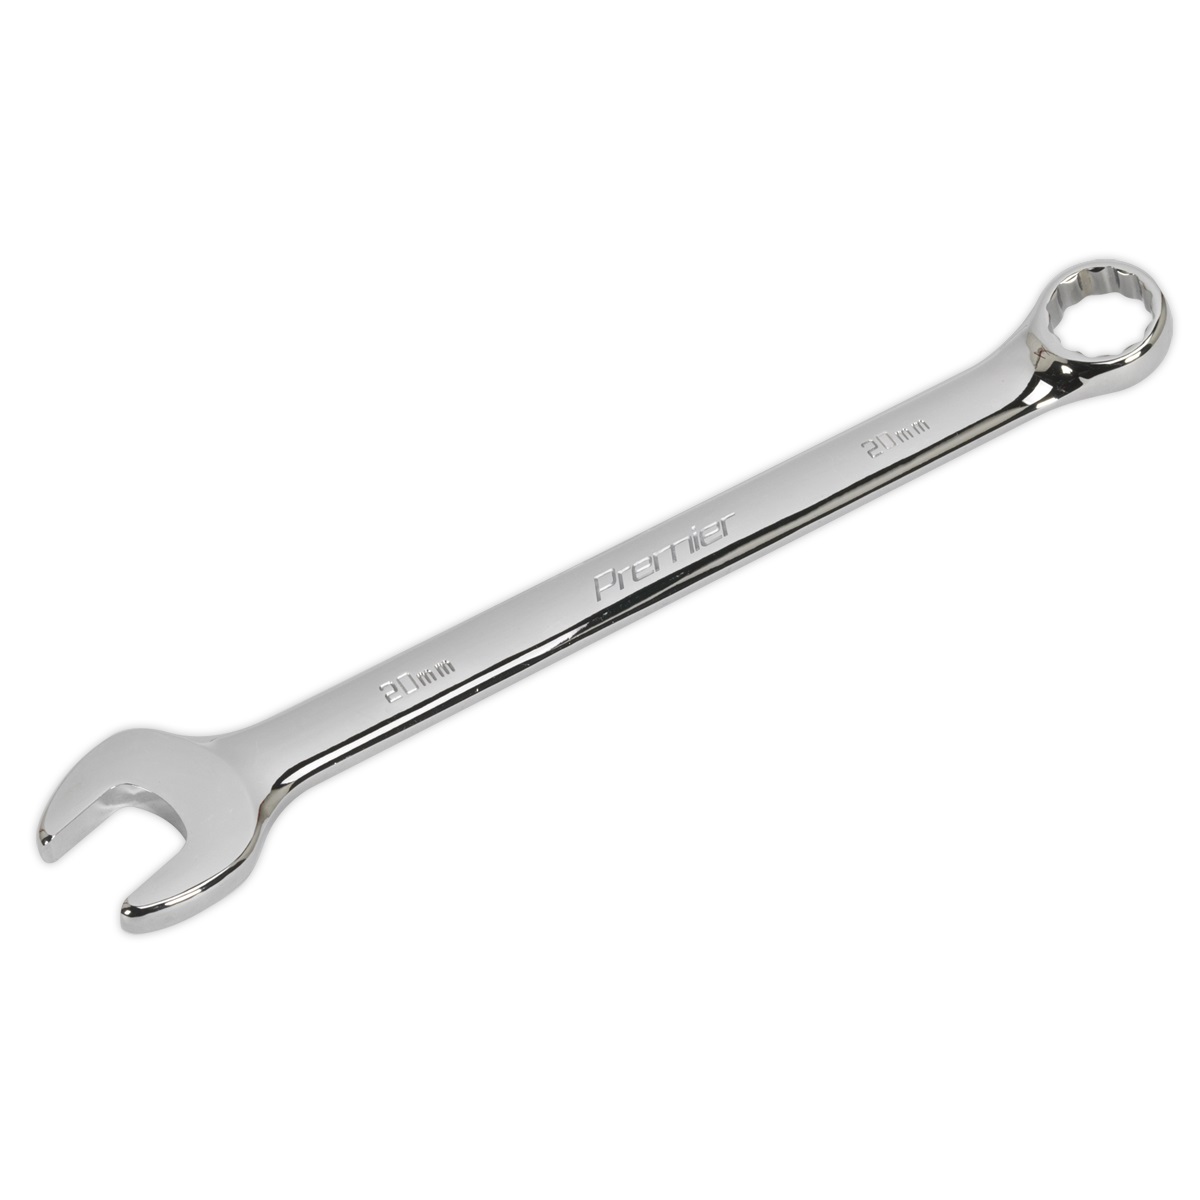 Sealey Combination Spanner 20mm CW20
High quality Premier WallDrive® combination spanner